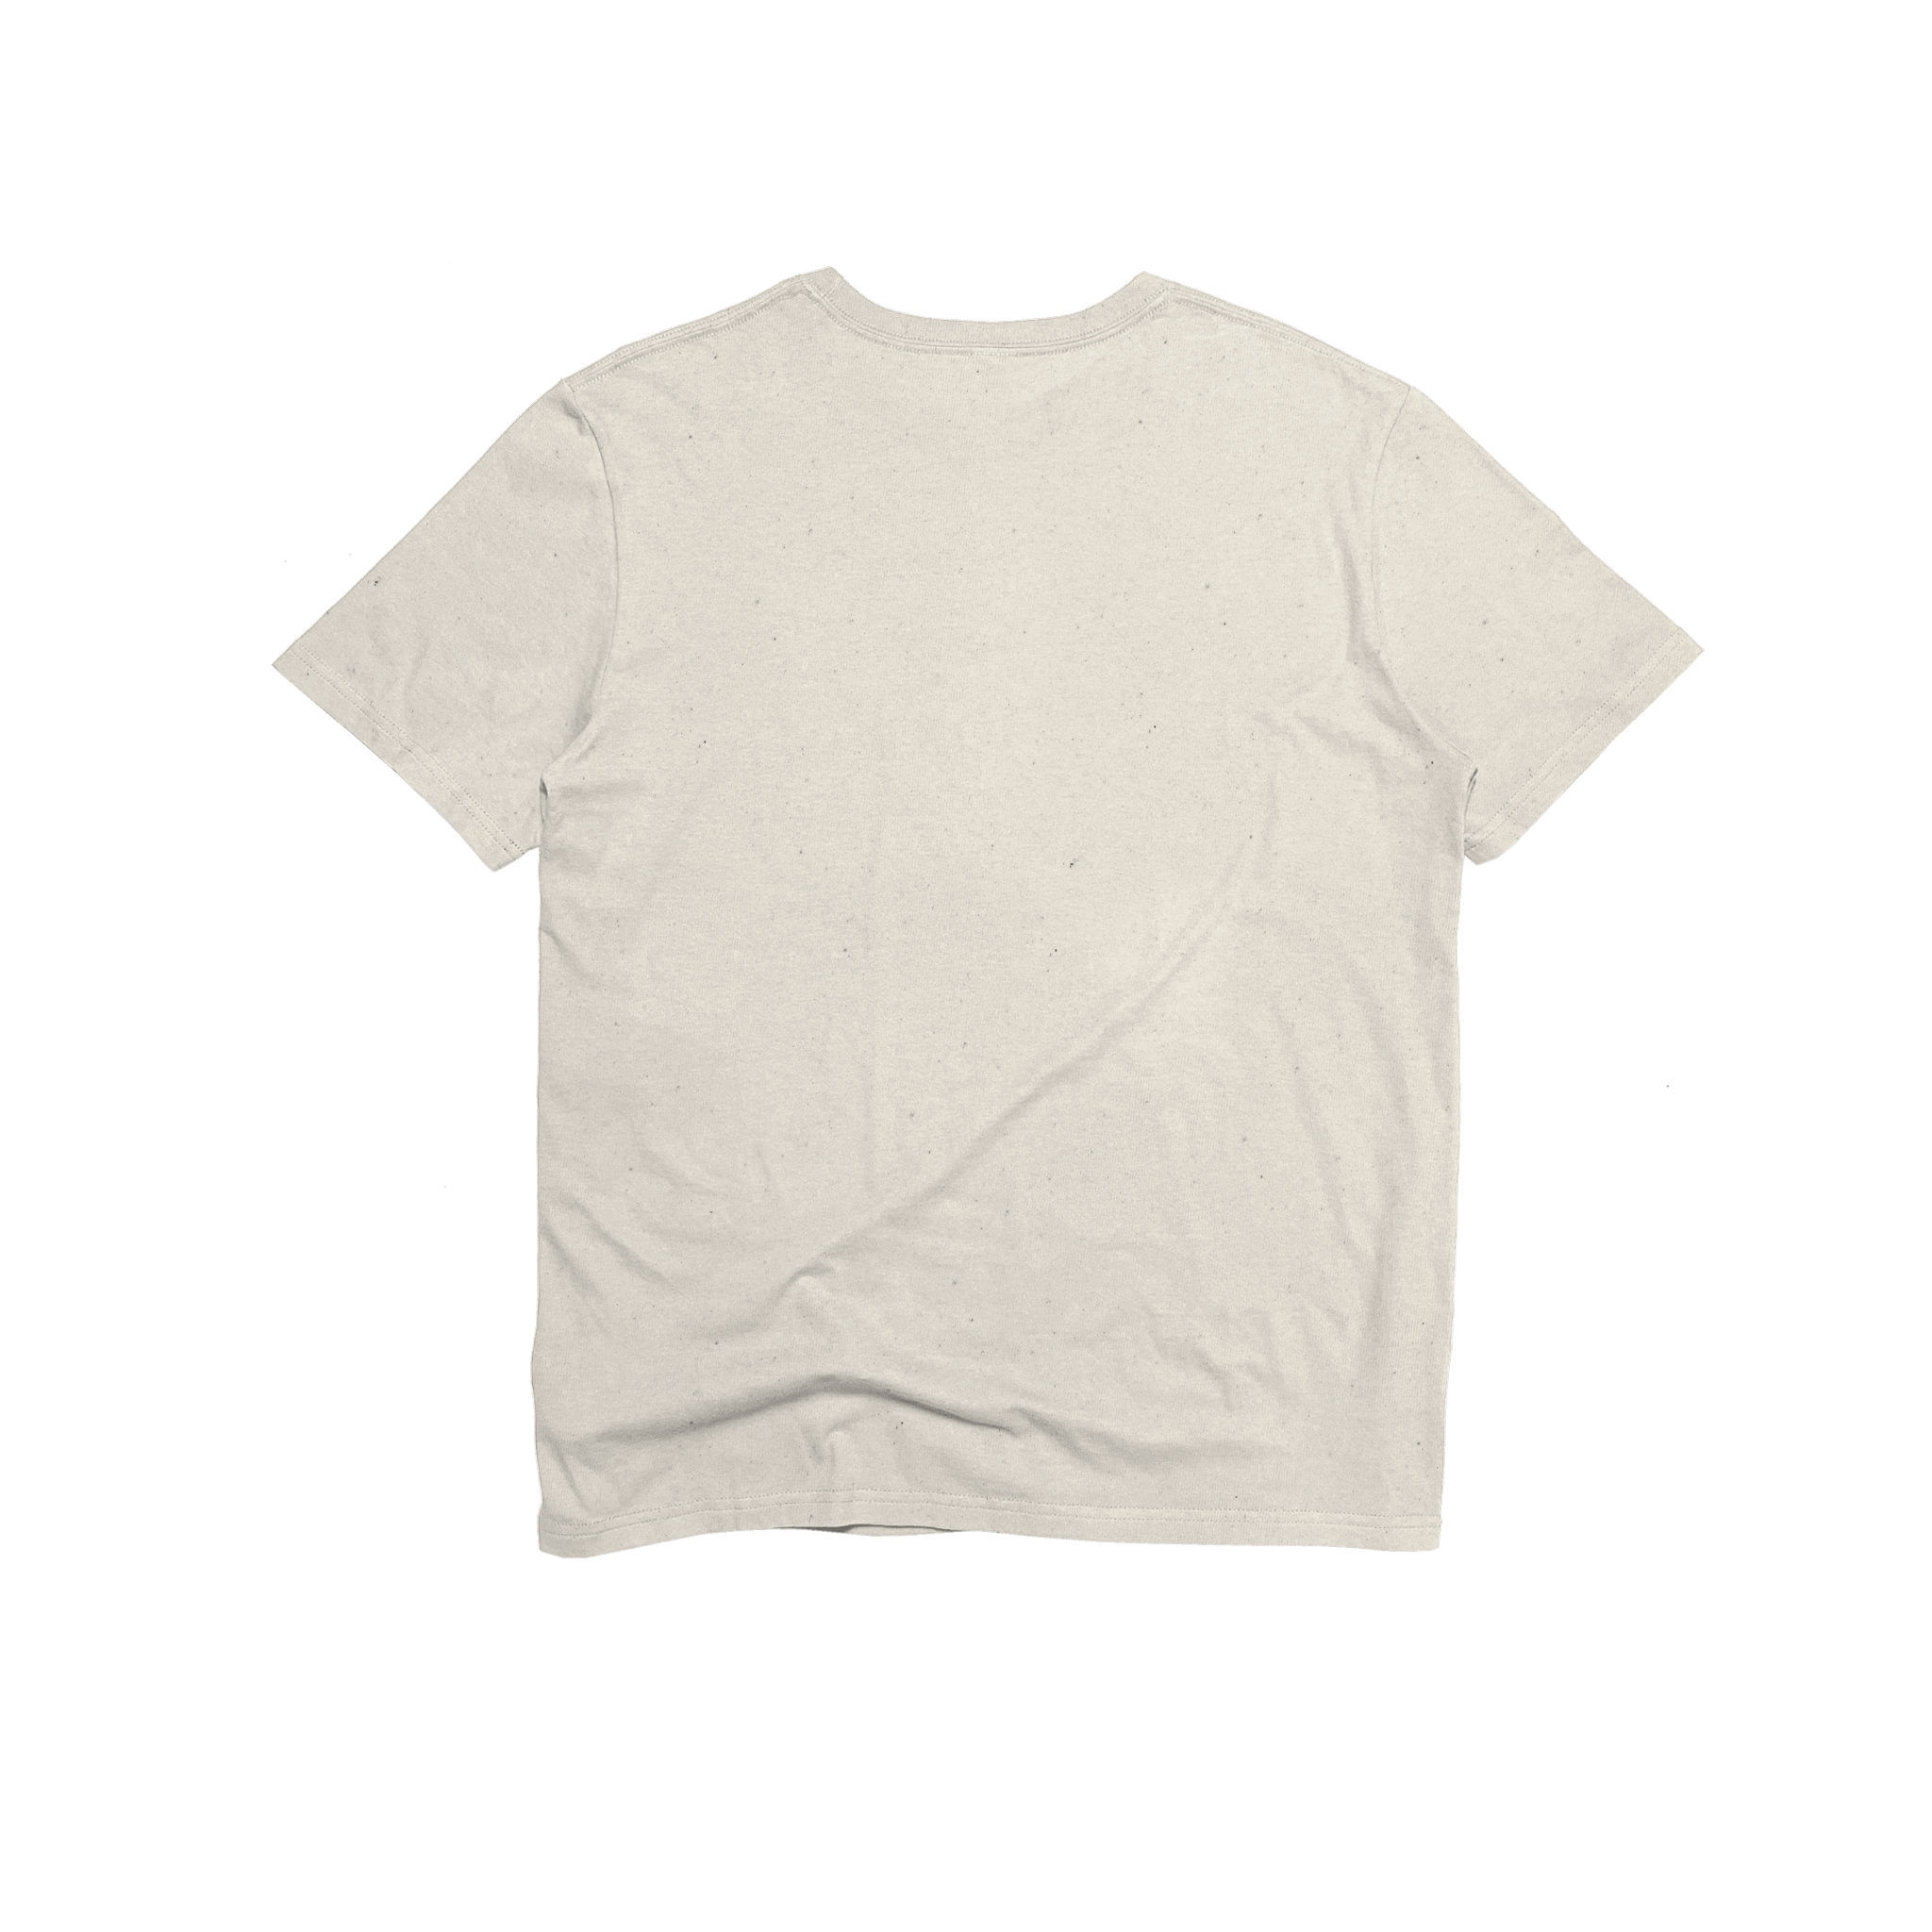 Back Flat Lay of GOEX Unisex and Men's Eco Cotton Tee in Ivory